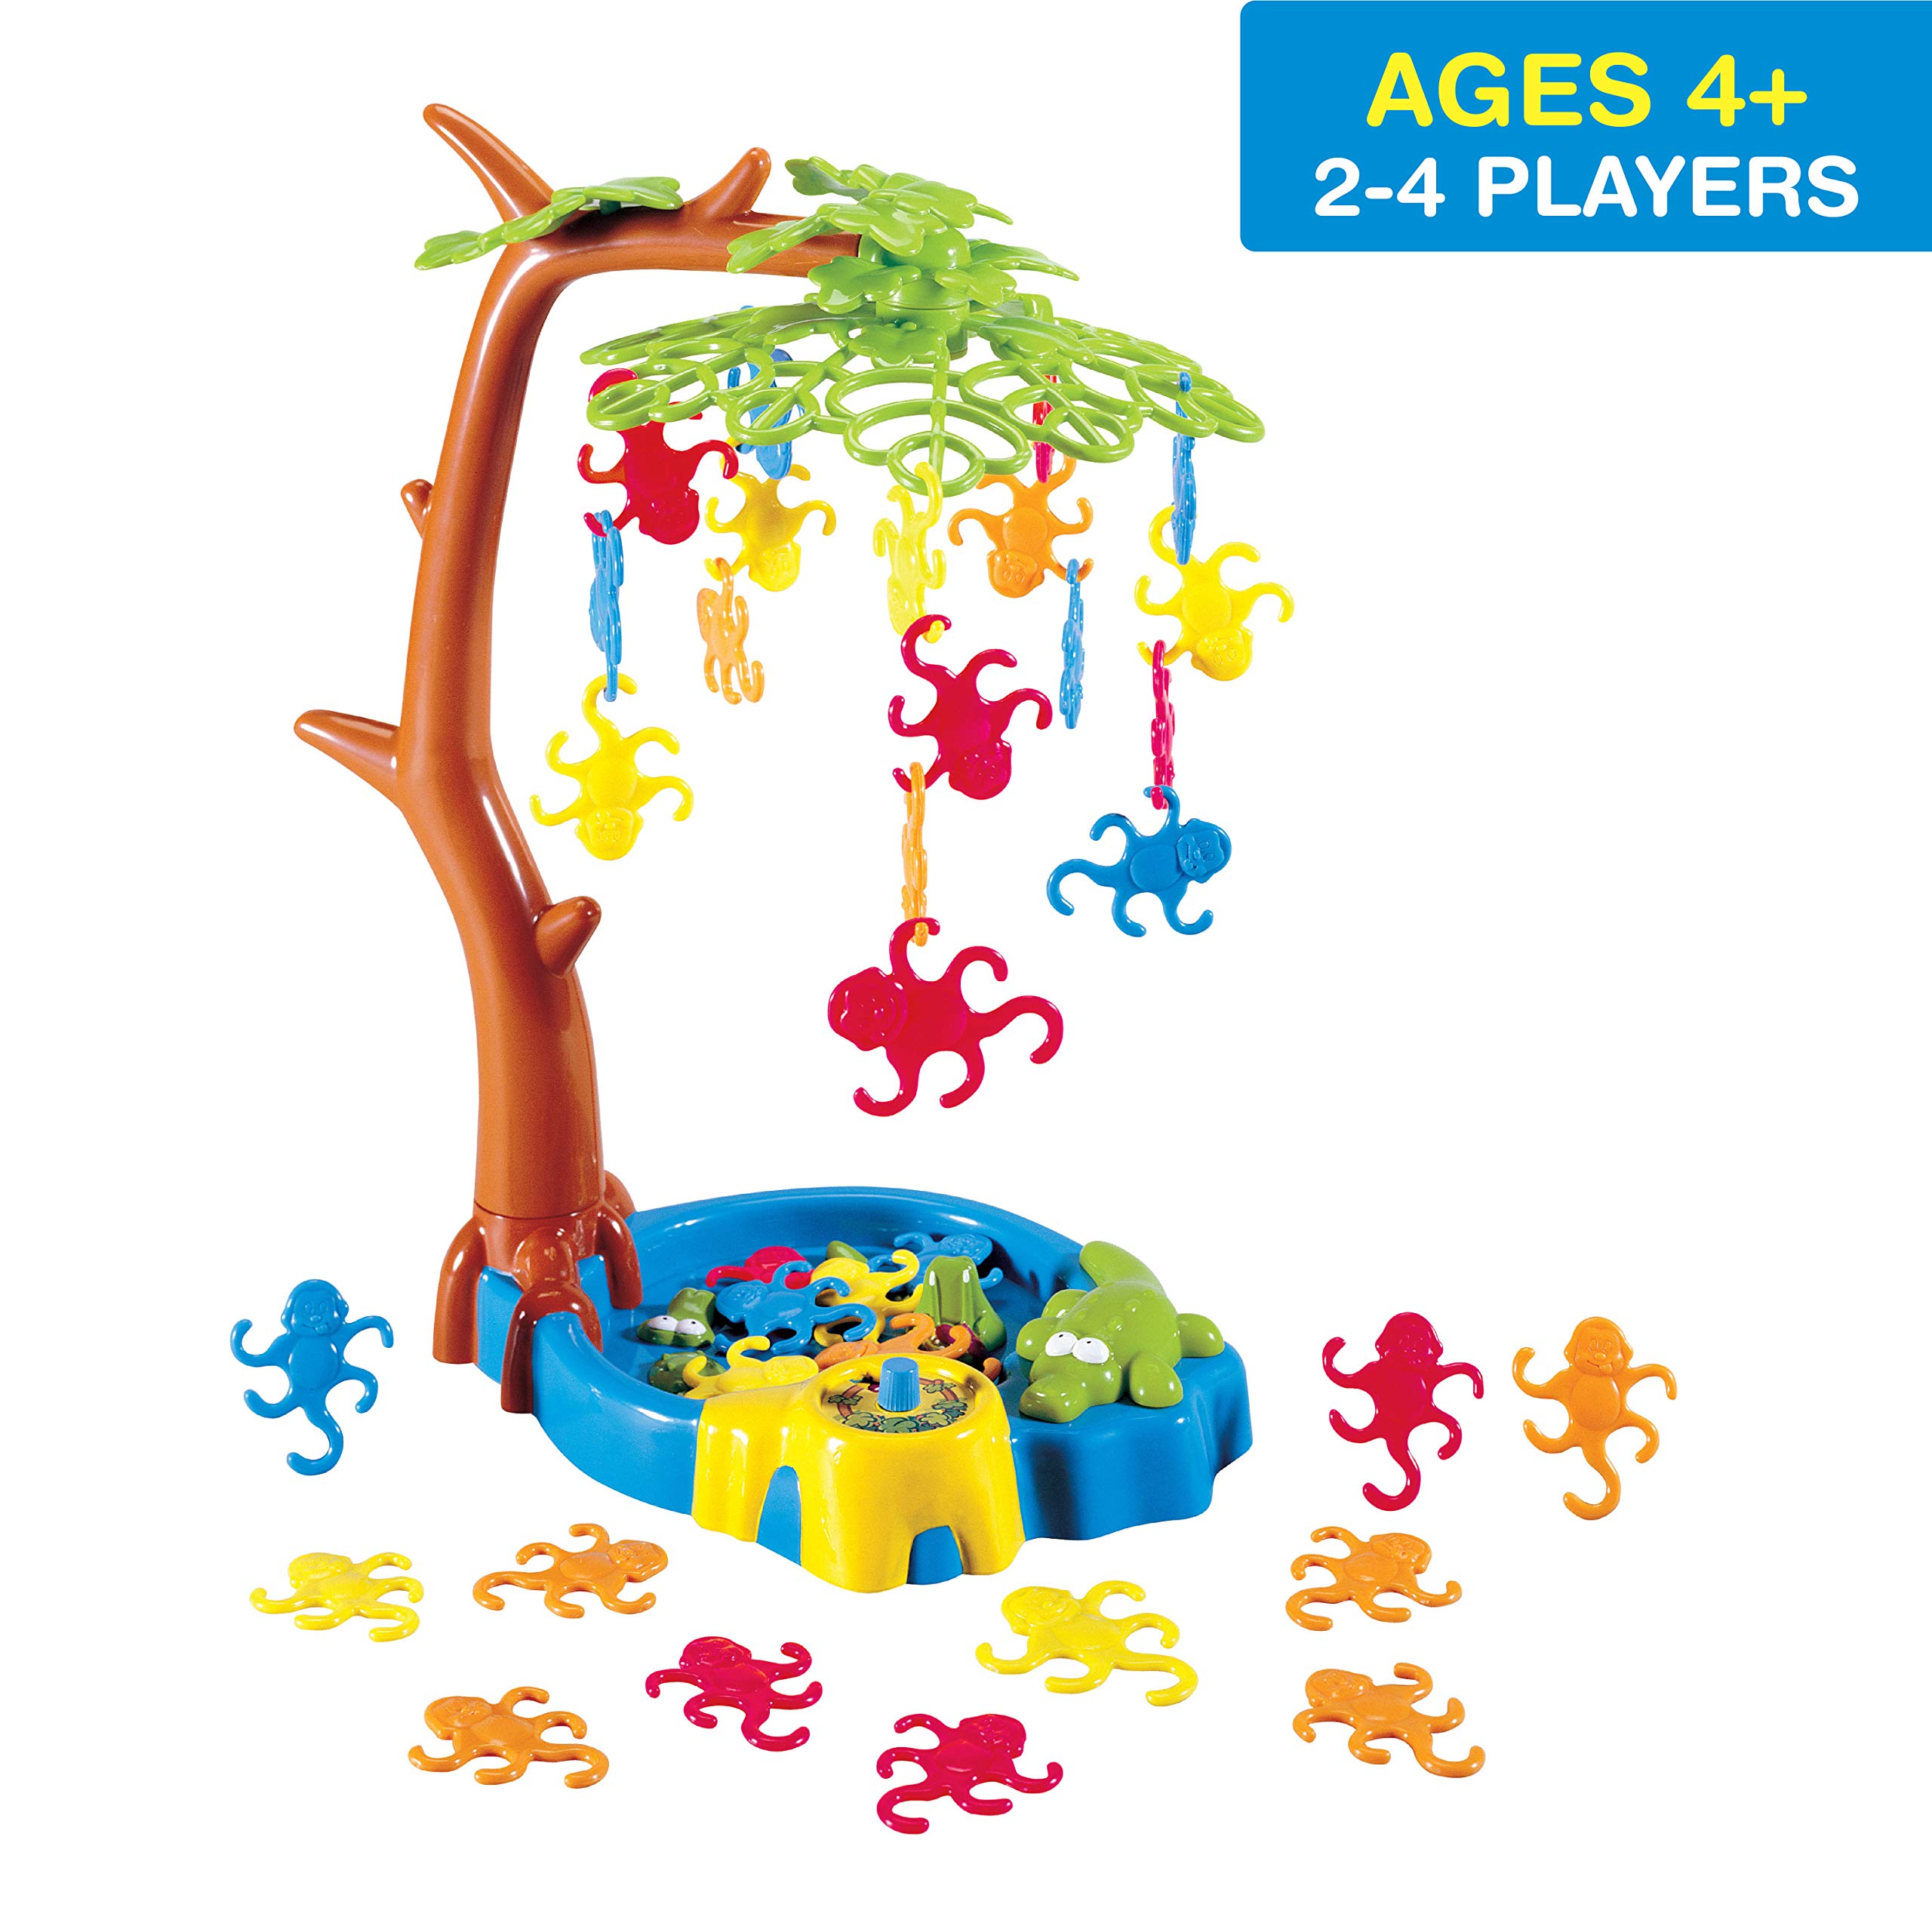 Game Zone Monkeying Around - Multiplayer Tabletop Balancing Game for Ages 4+ - Helps Develop Hand-Eye Coordination and Problem-Solving Skills!